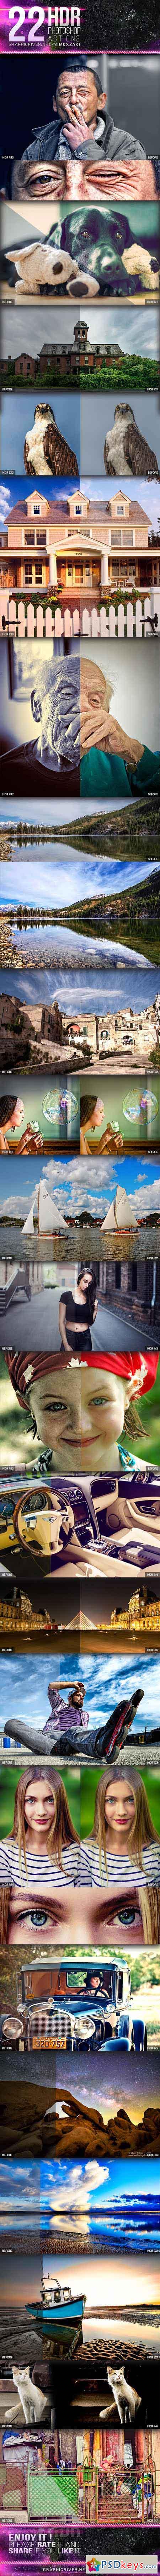 22 HDR Photoshop Actions V2 10940400